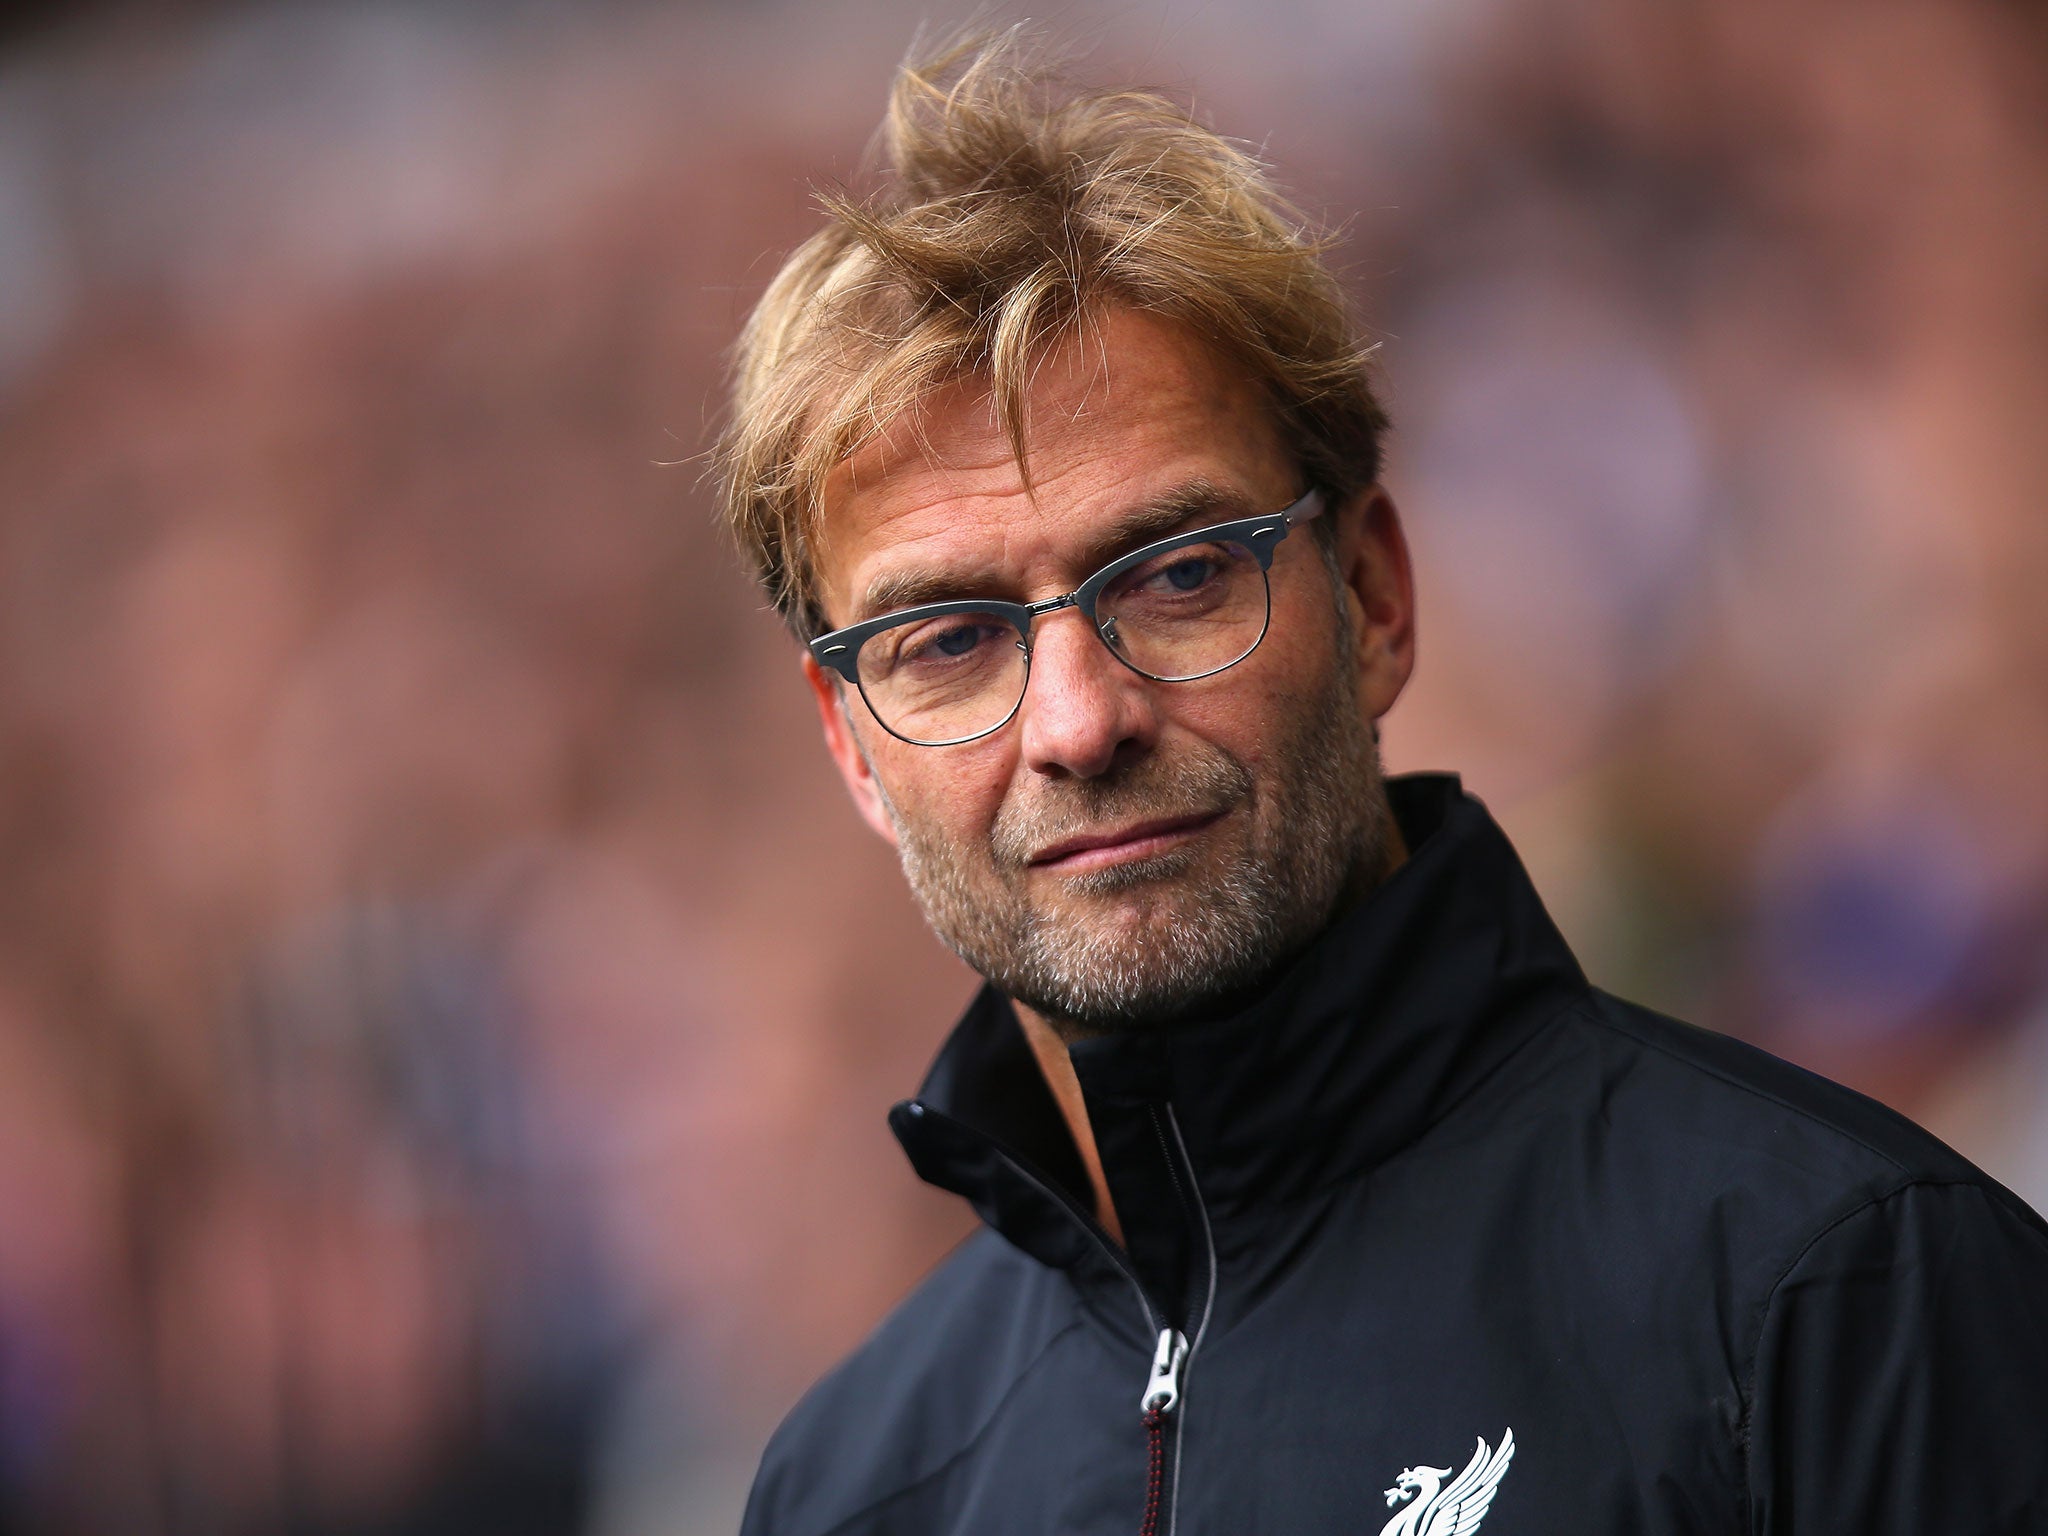 Klopp was approached by a number of clubs after parting ways with Dortmund in 2015